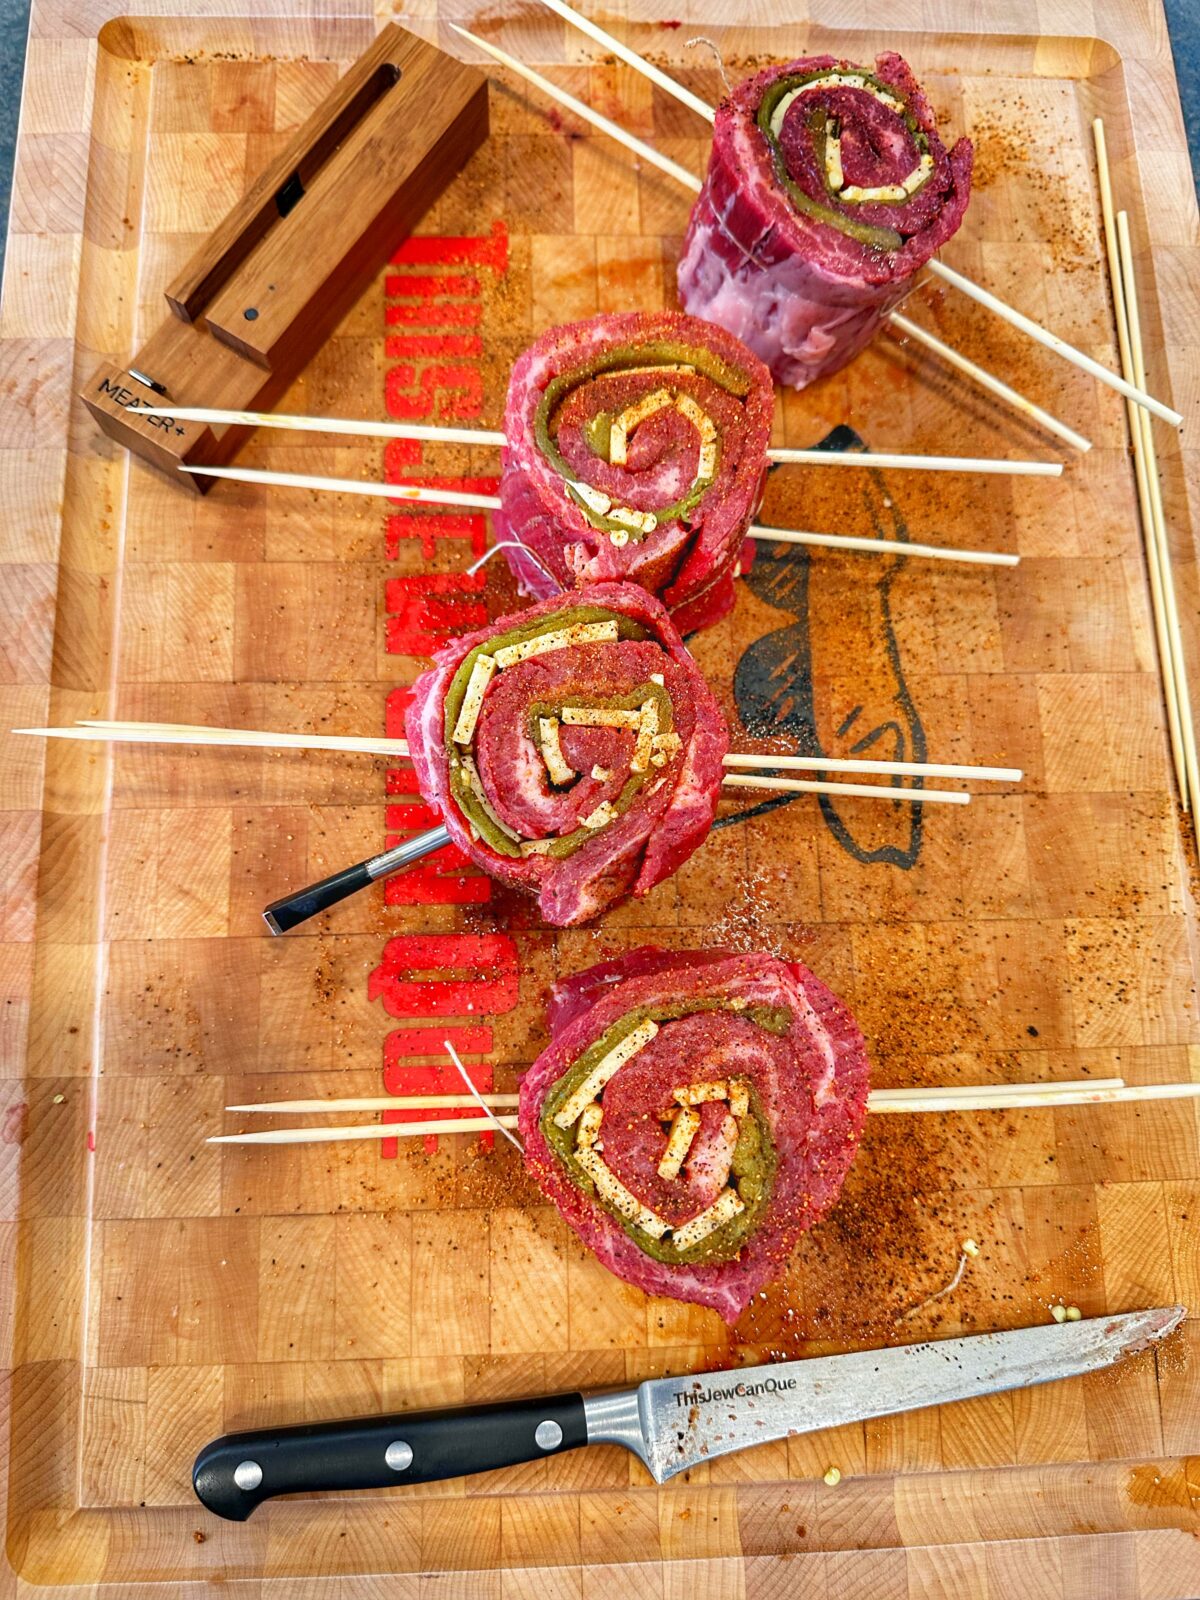 Rolled pinwheels on a cutting board with knife and thermometer.